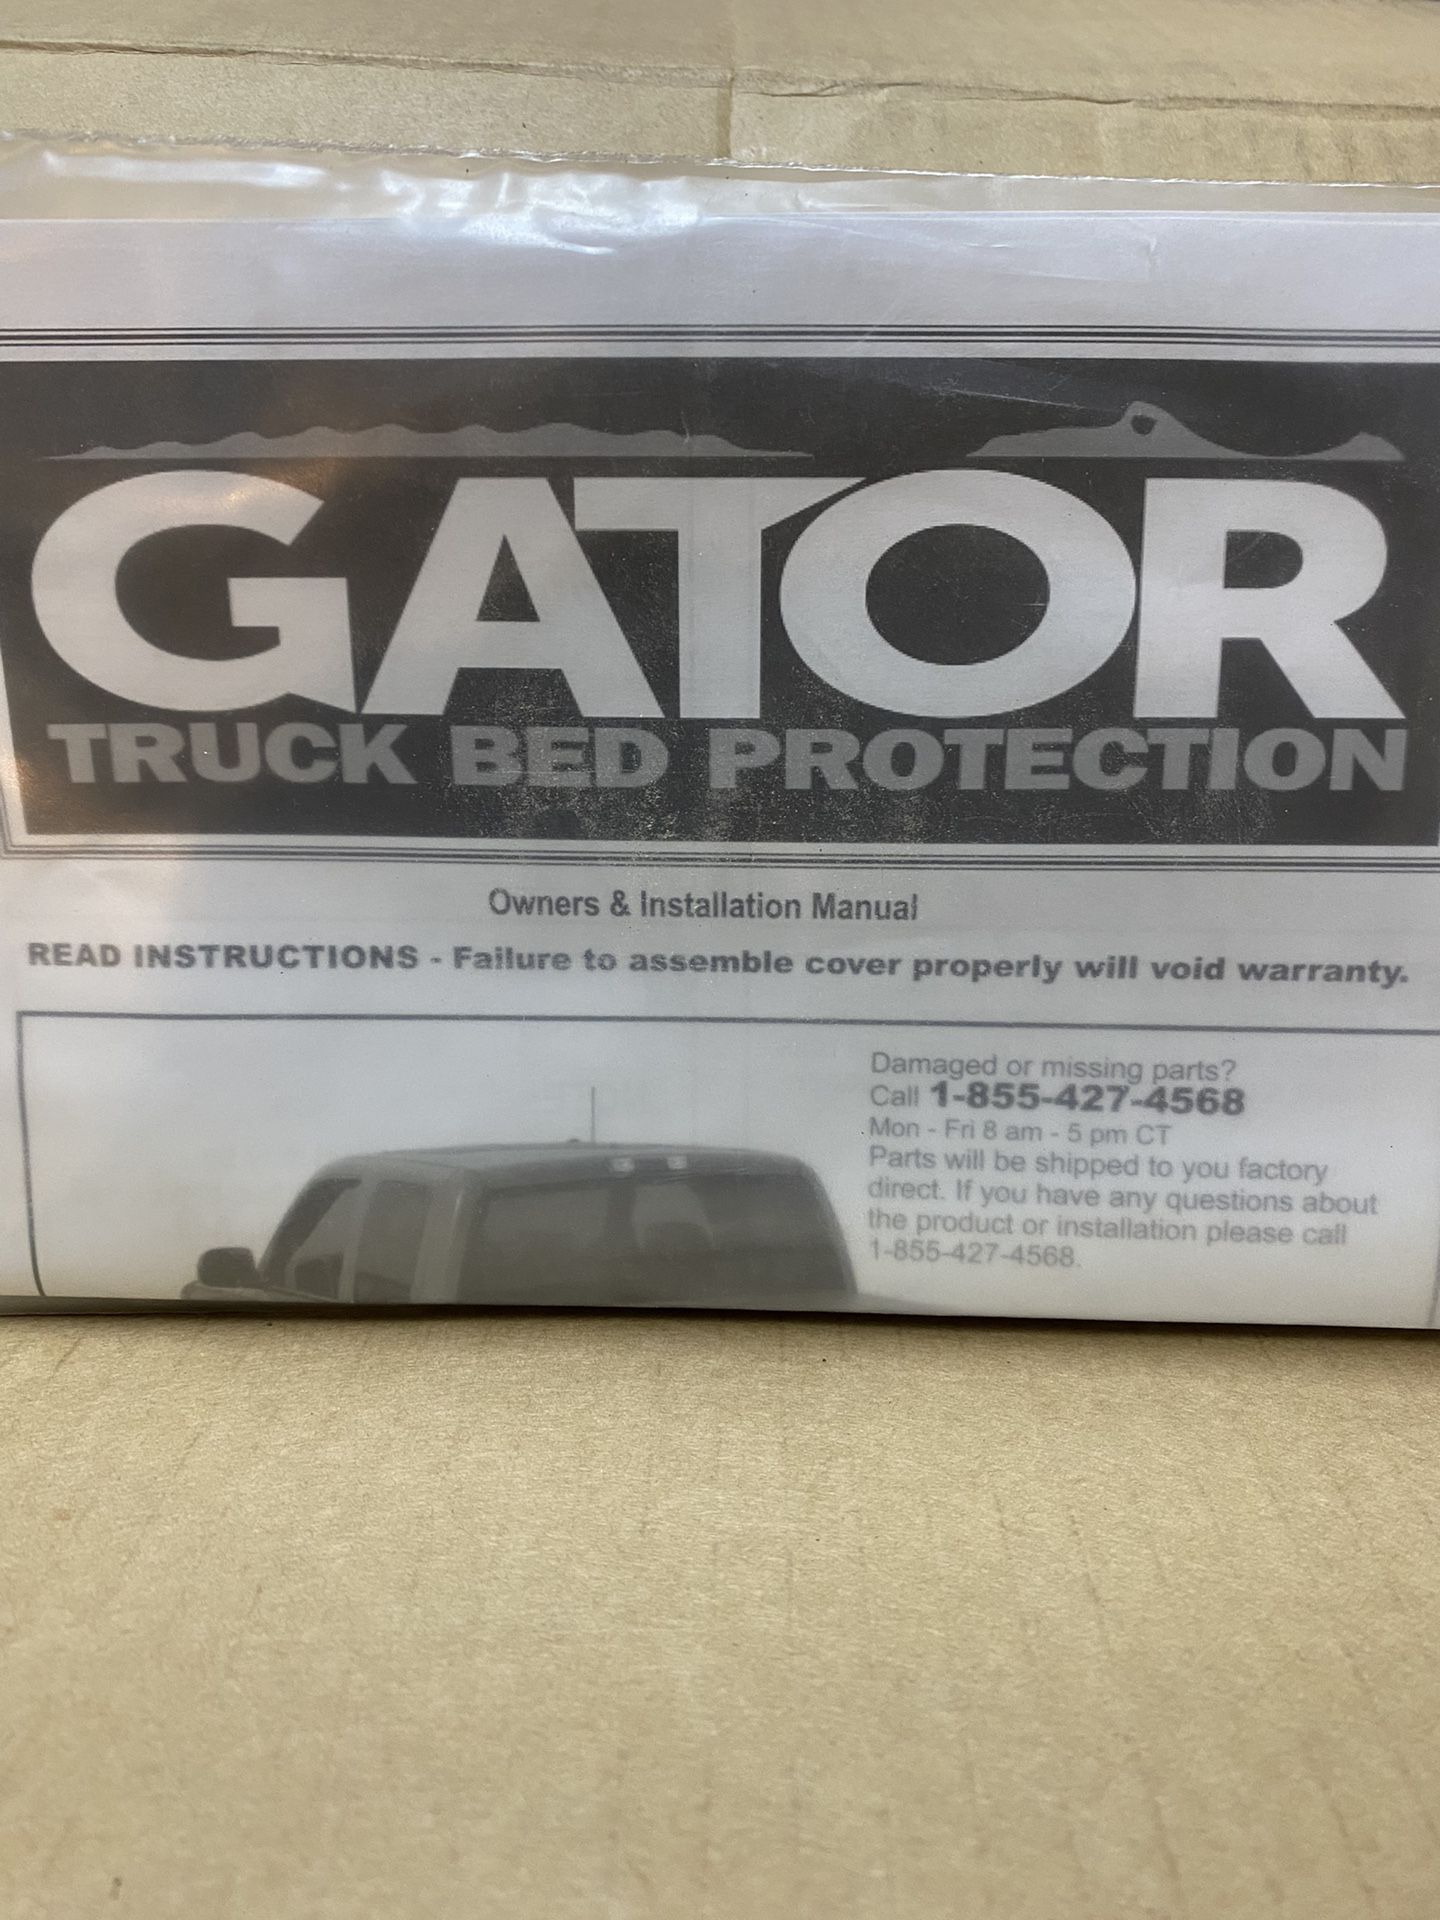 Gator Truck Bed Protection